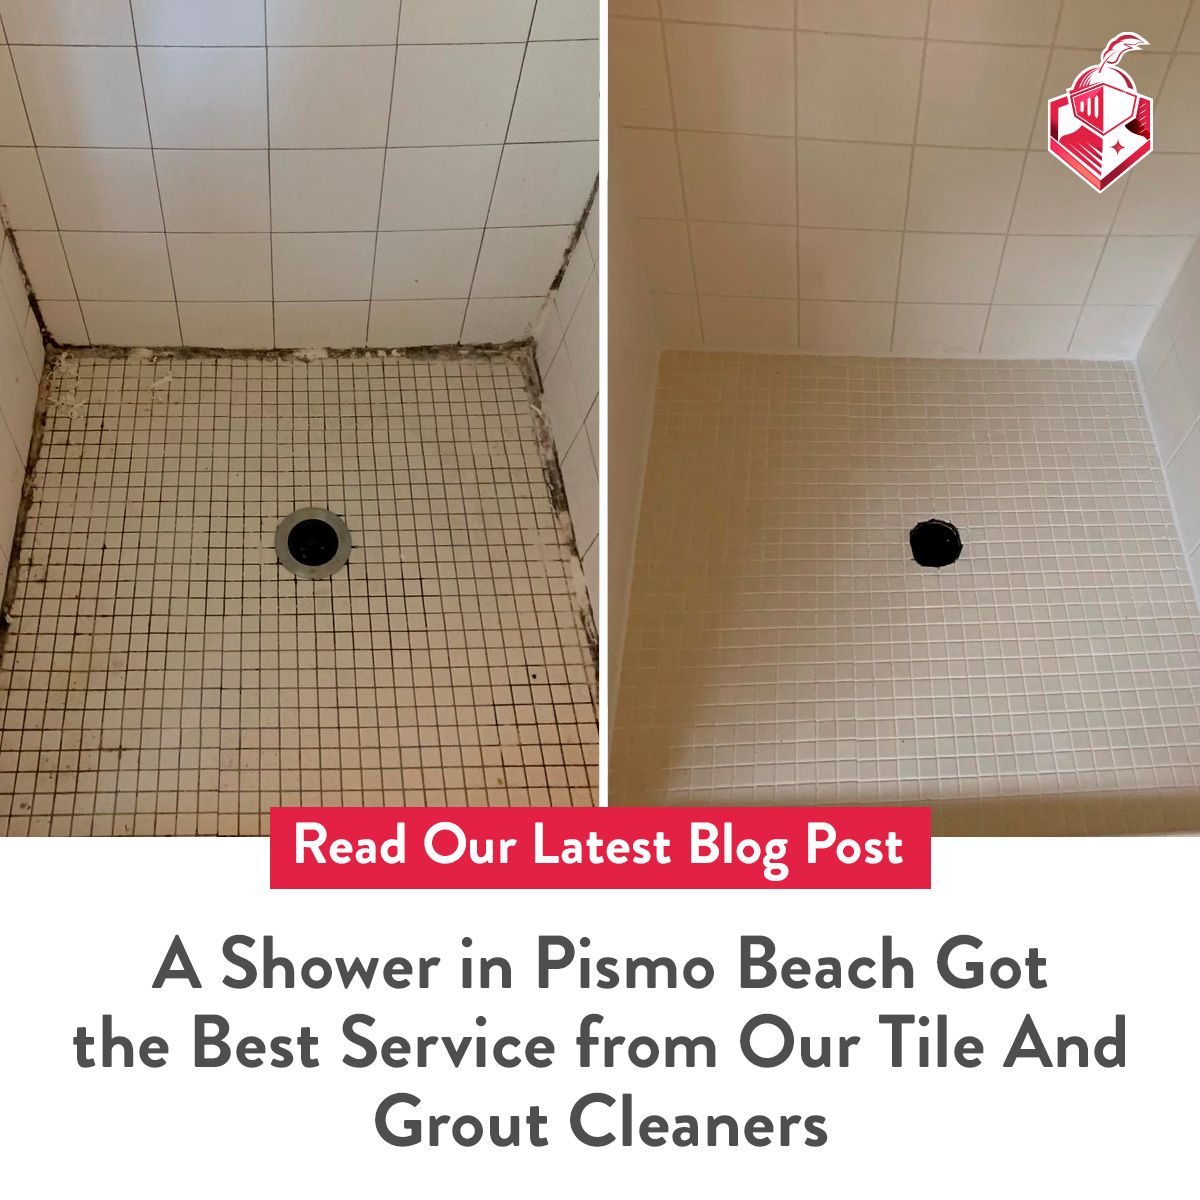 A Shower in Pismo Beach Got the Best Service from Our Tile And Grout Cleaners